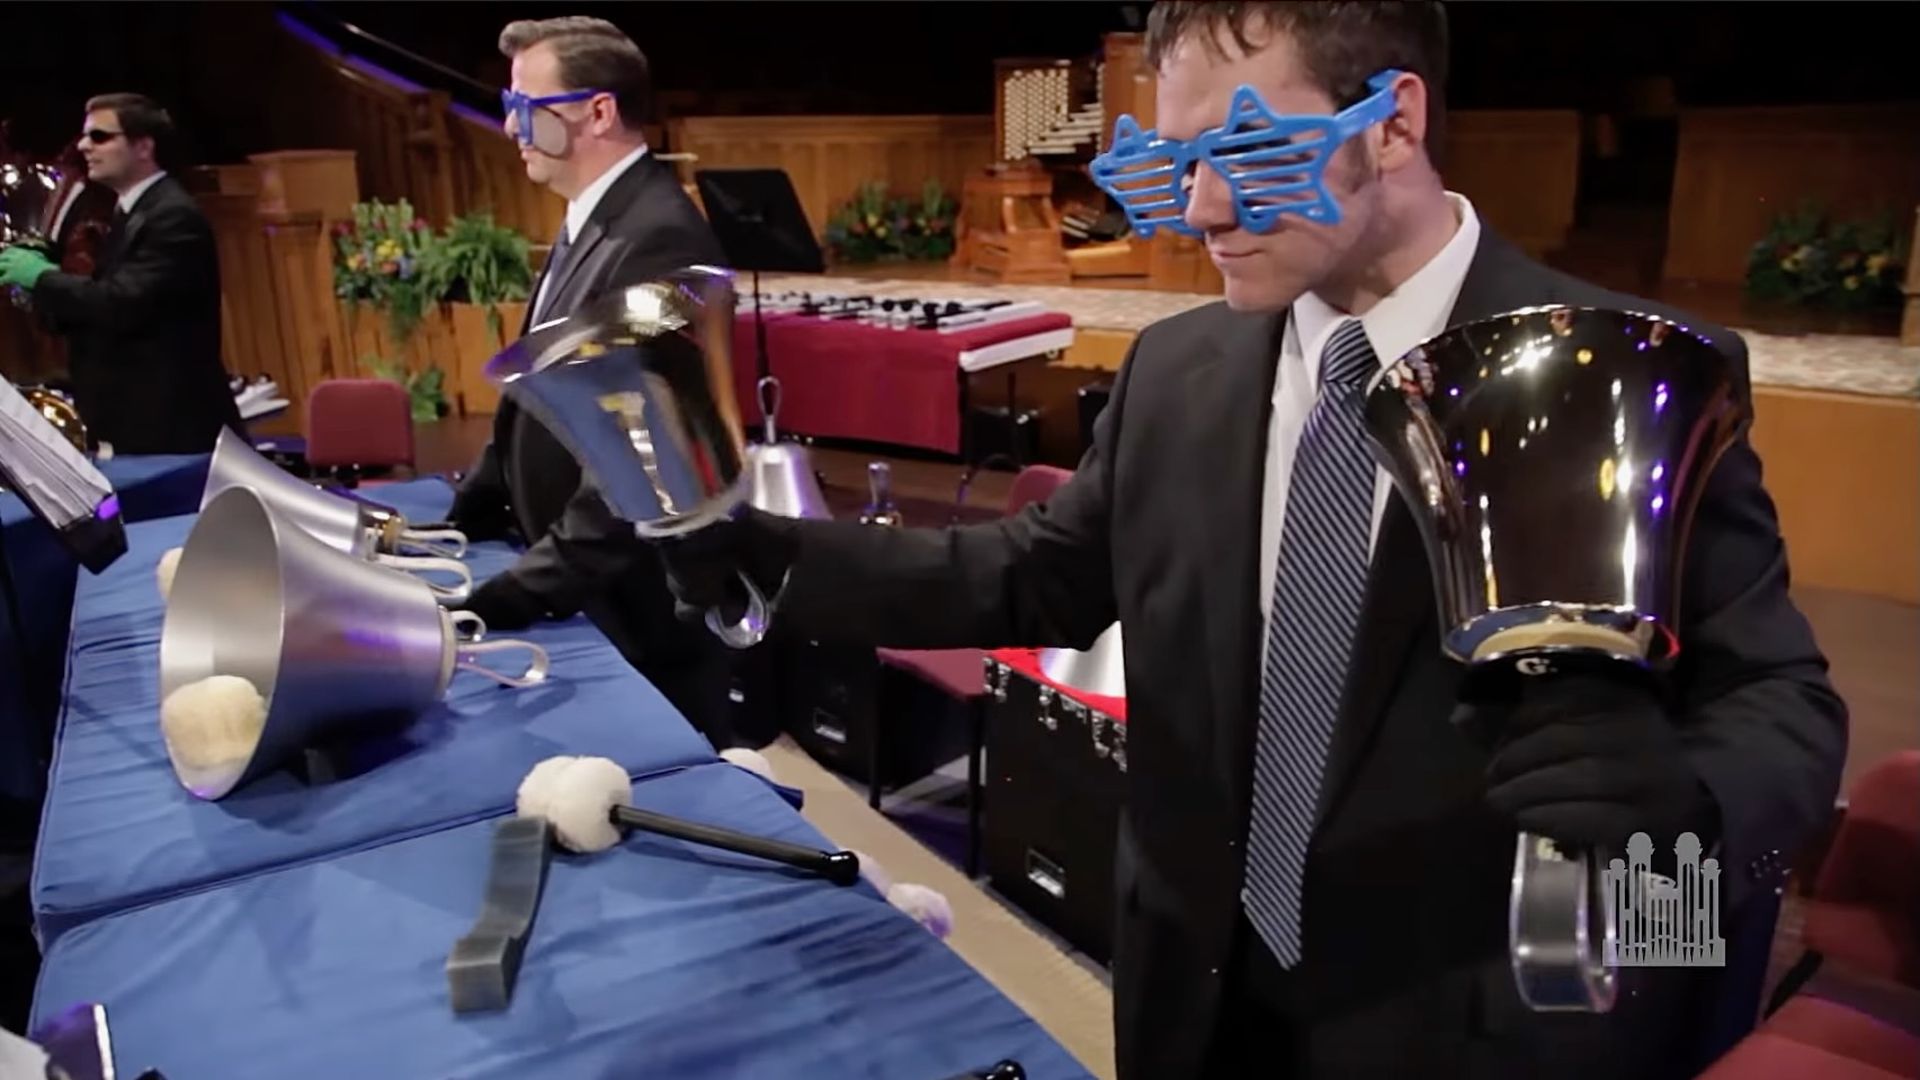 Men in sunglasses play handbells over a blue padded table.